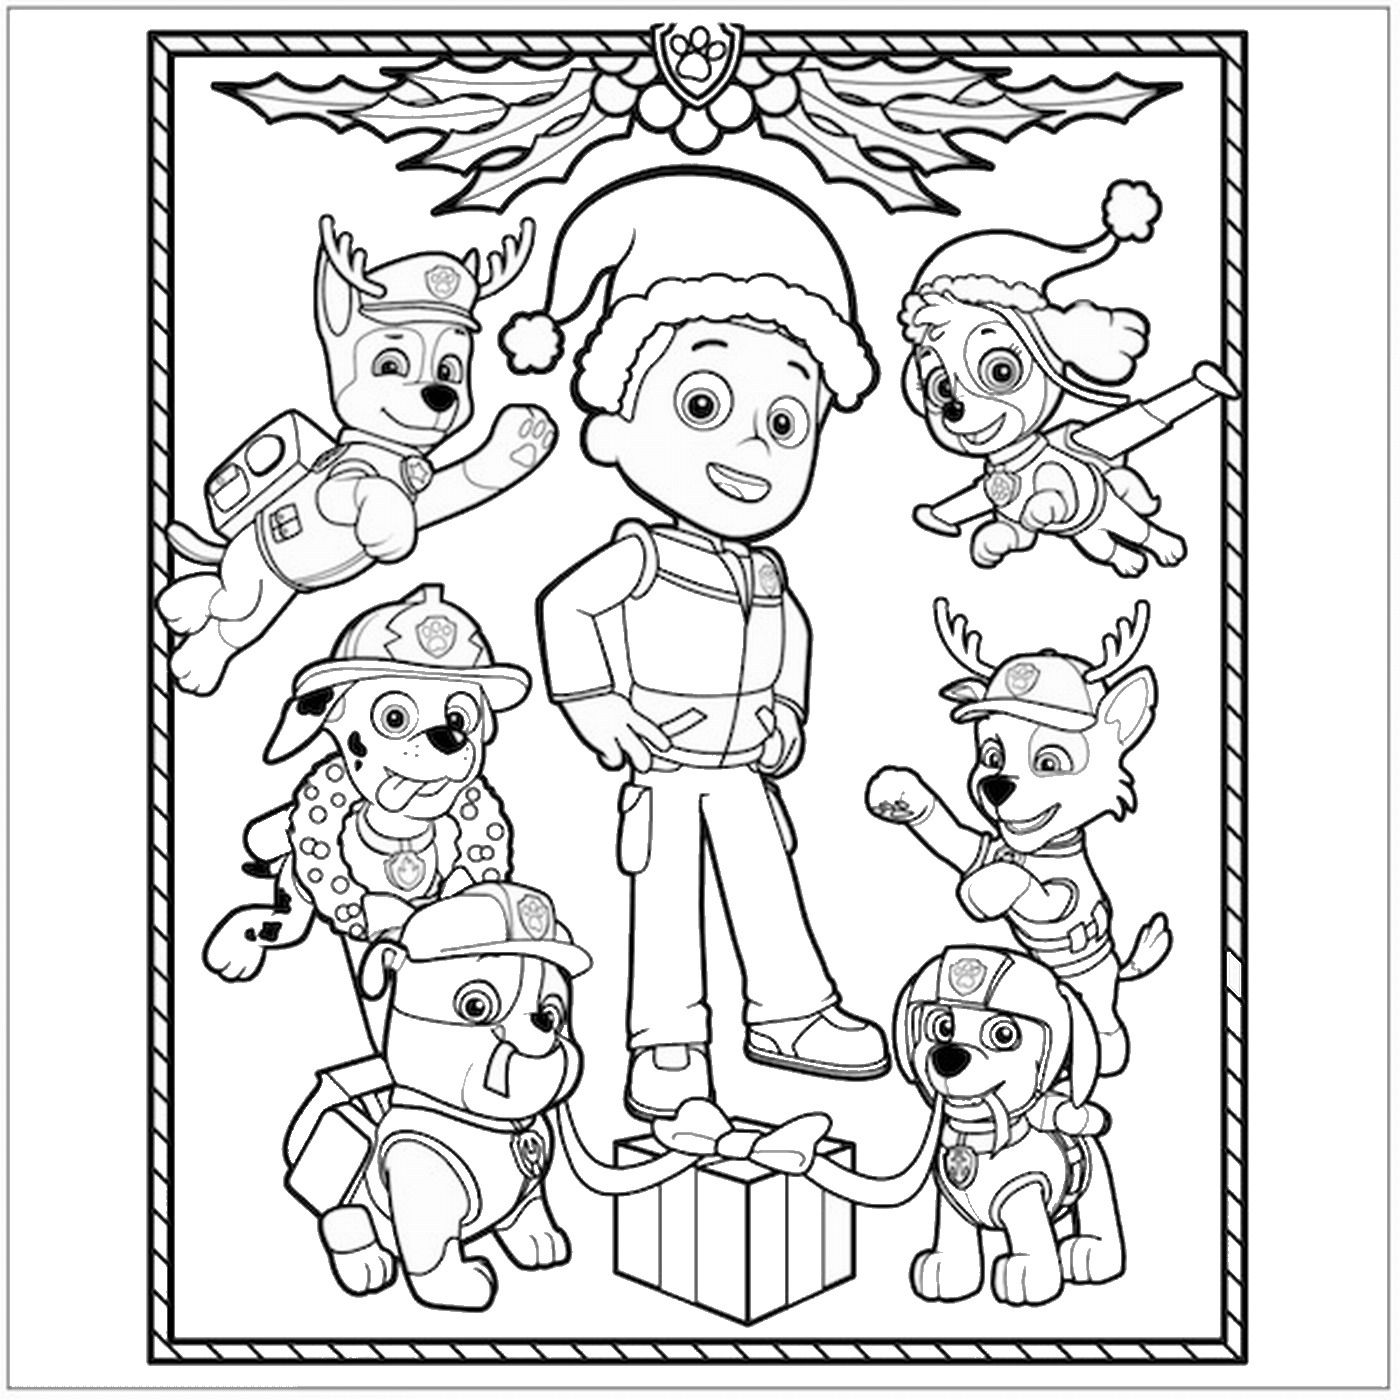 Paw Patrol Christmas Coloring Pages - Coloring